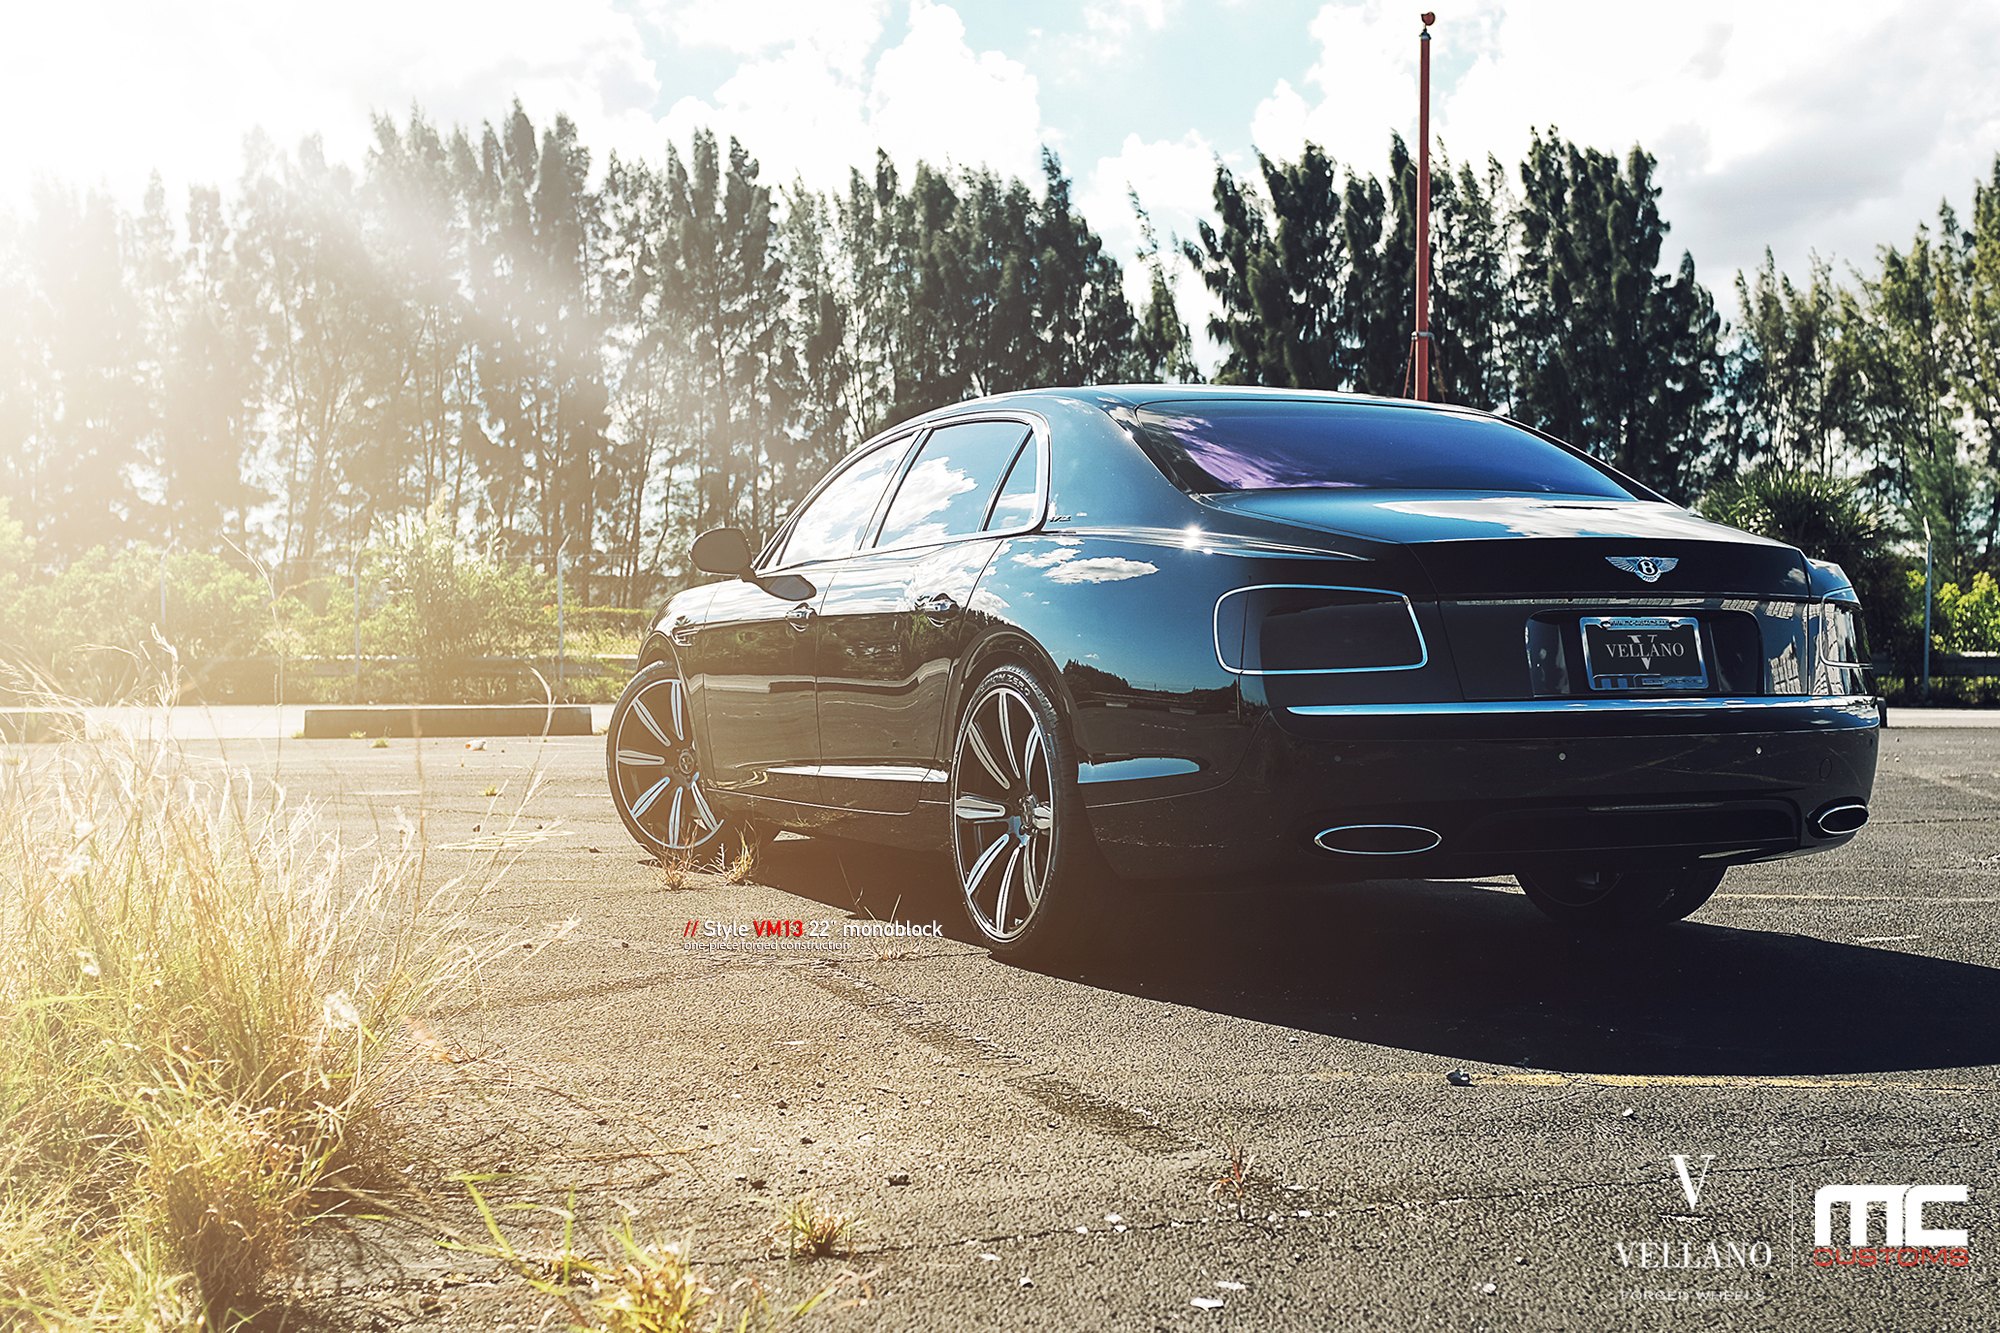 Black Bently Flying Spur with Dark Smoke Taillights - Photo by Vellano